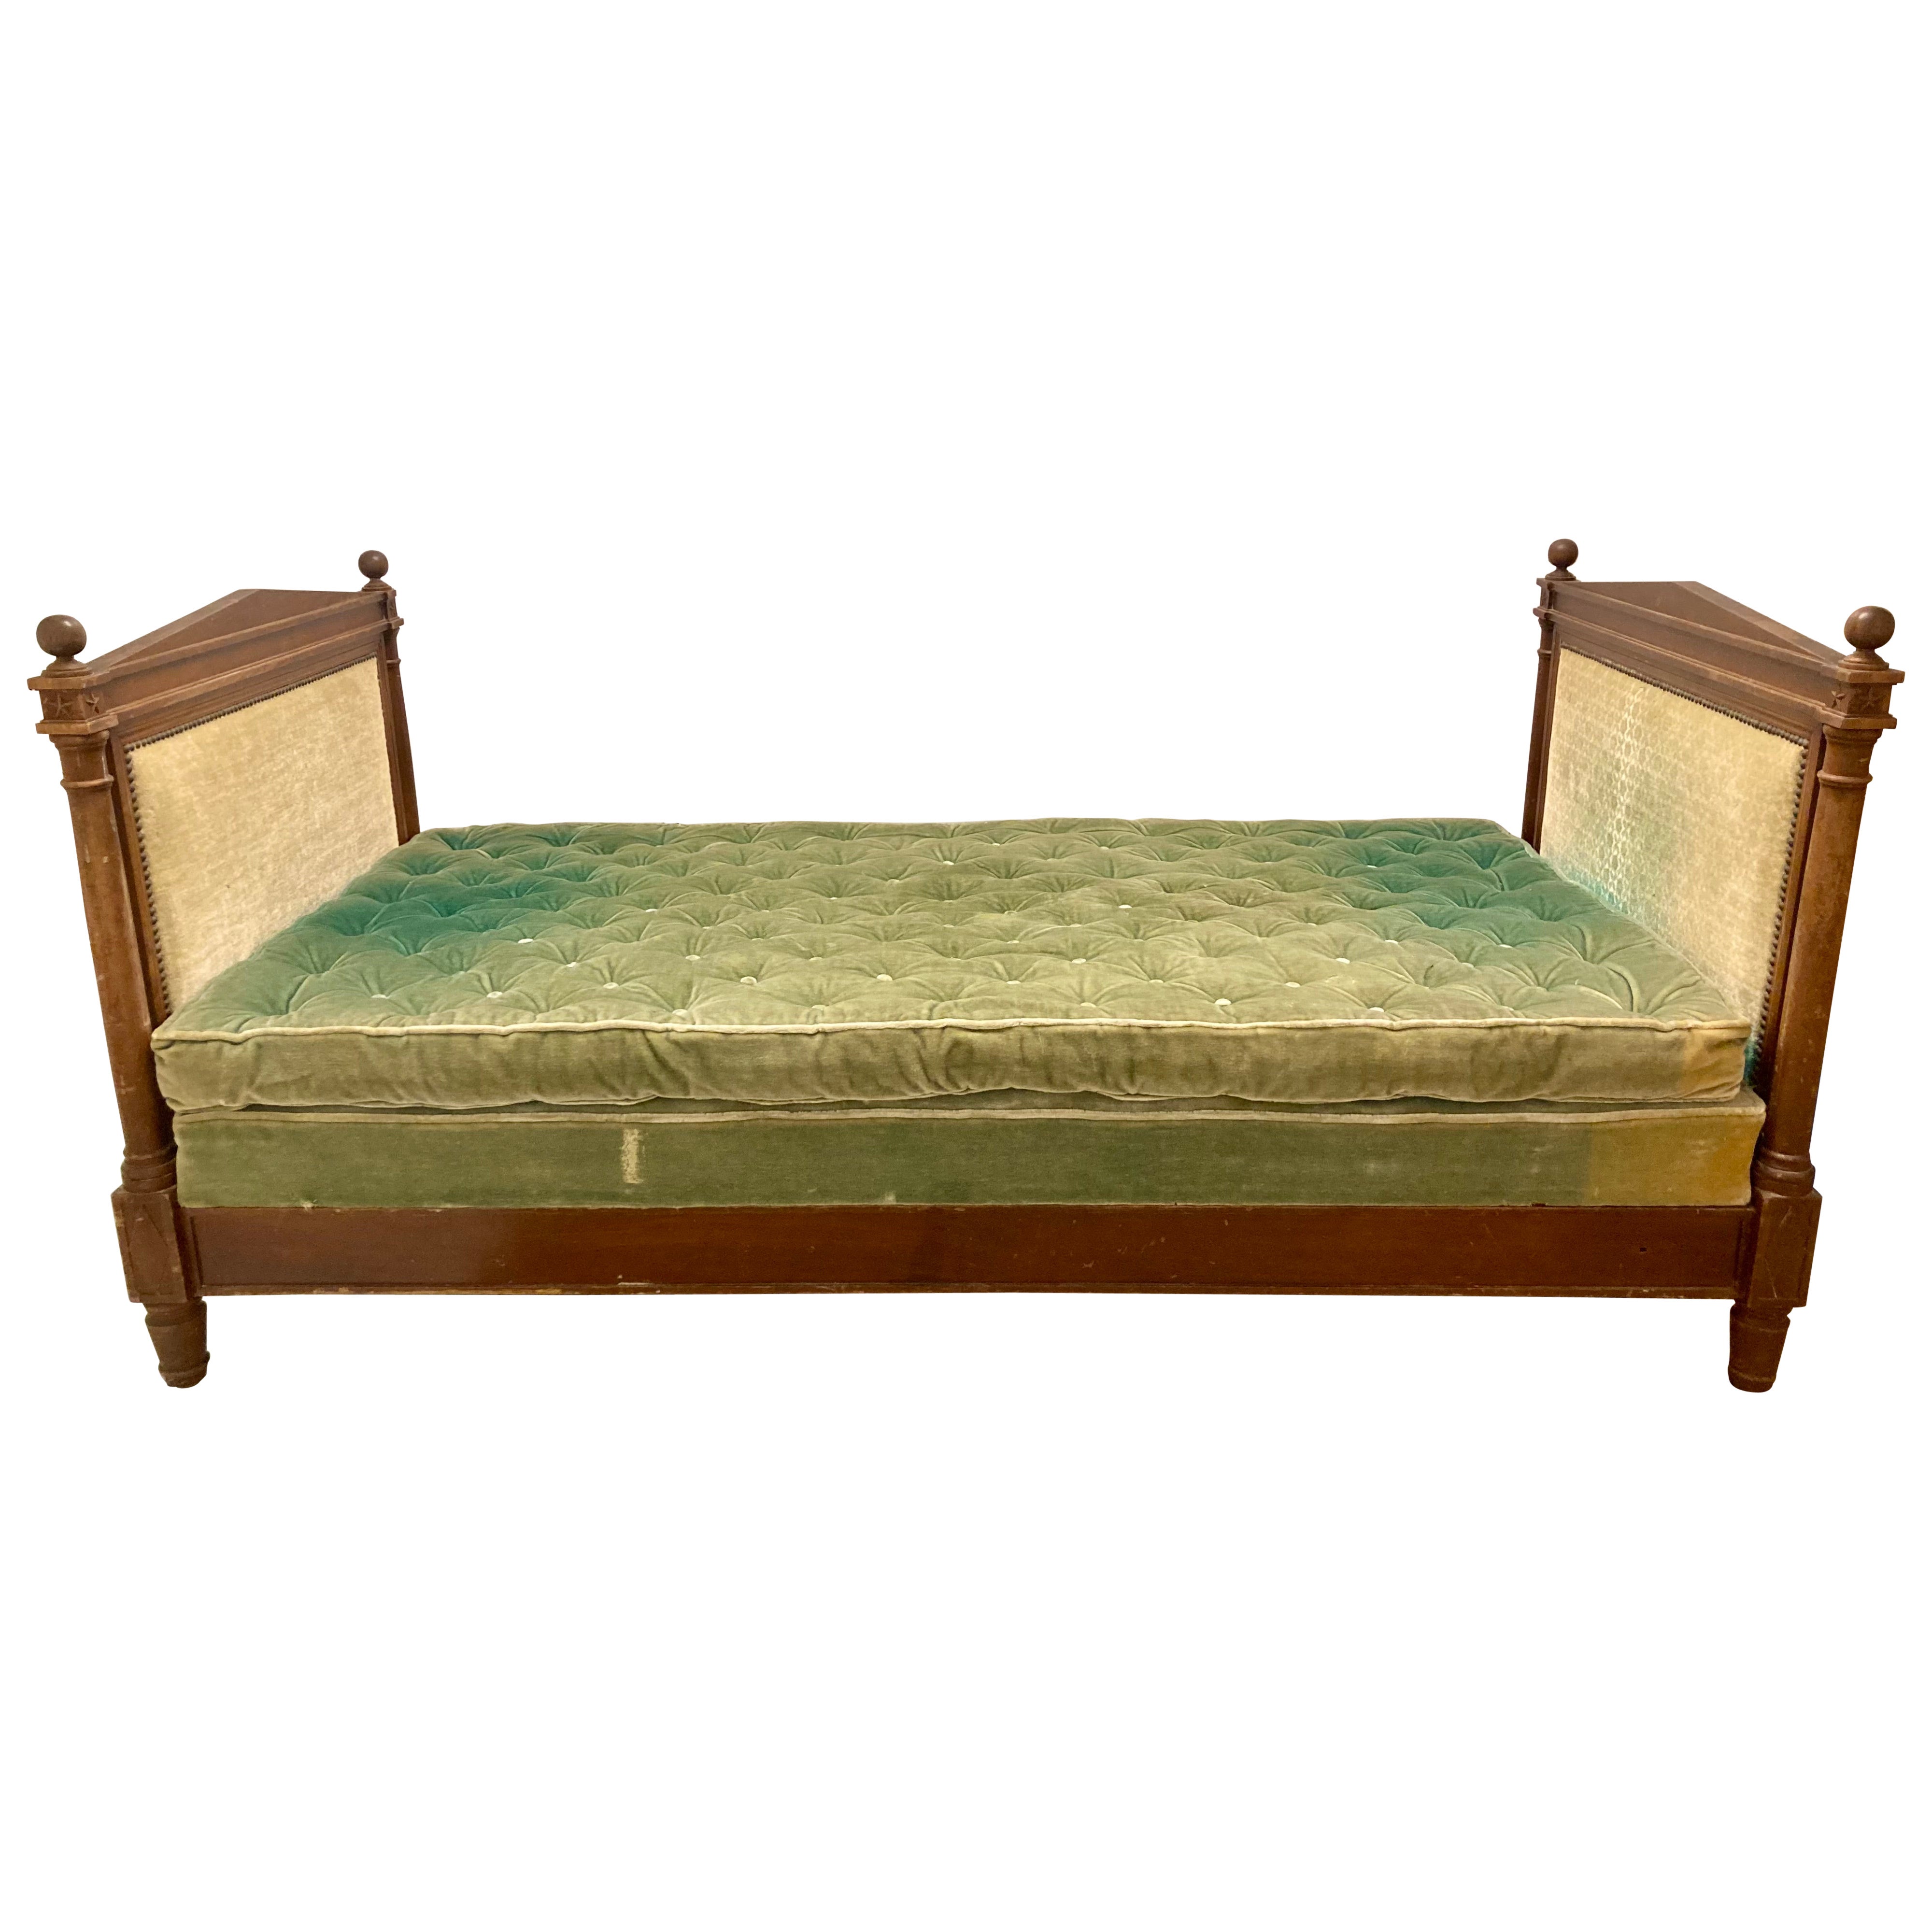 French 19thC Directoire Daybed With Original Tufted Upholstered Seat Cushion Set For Sale